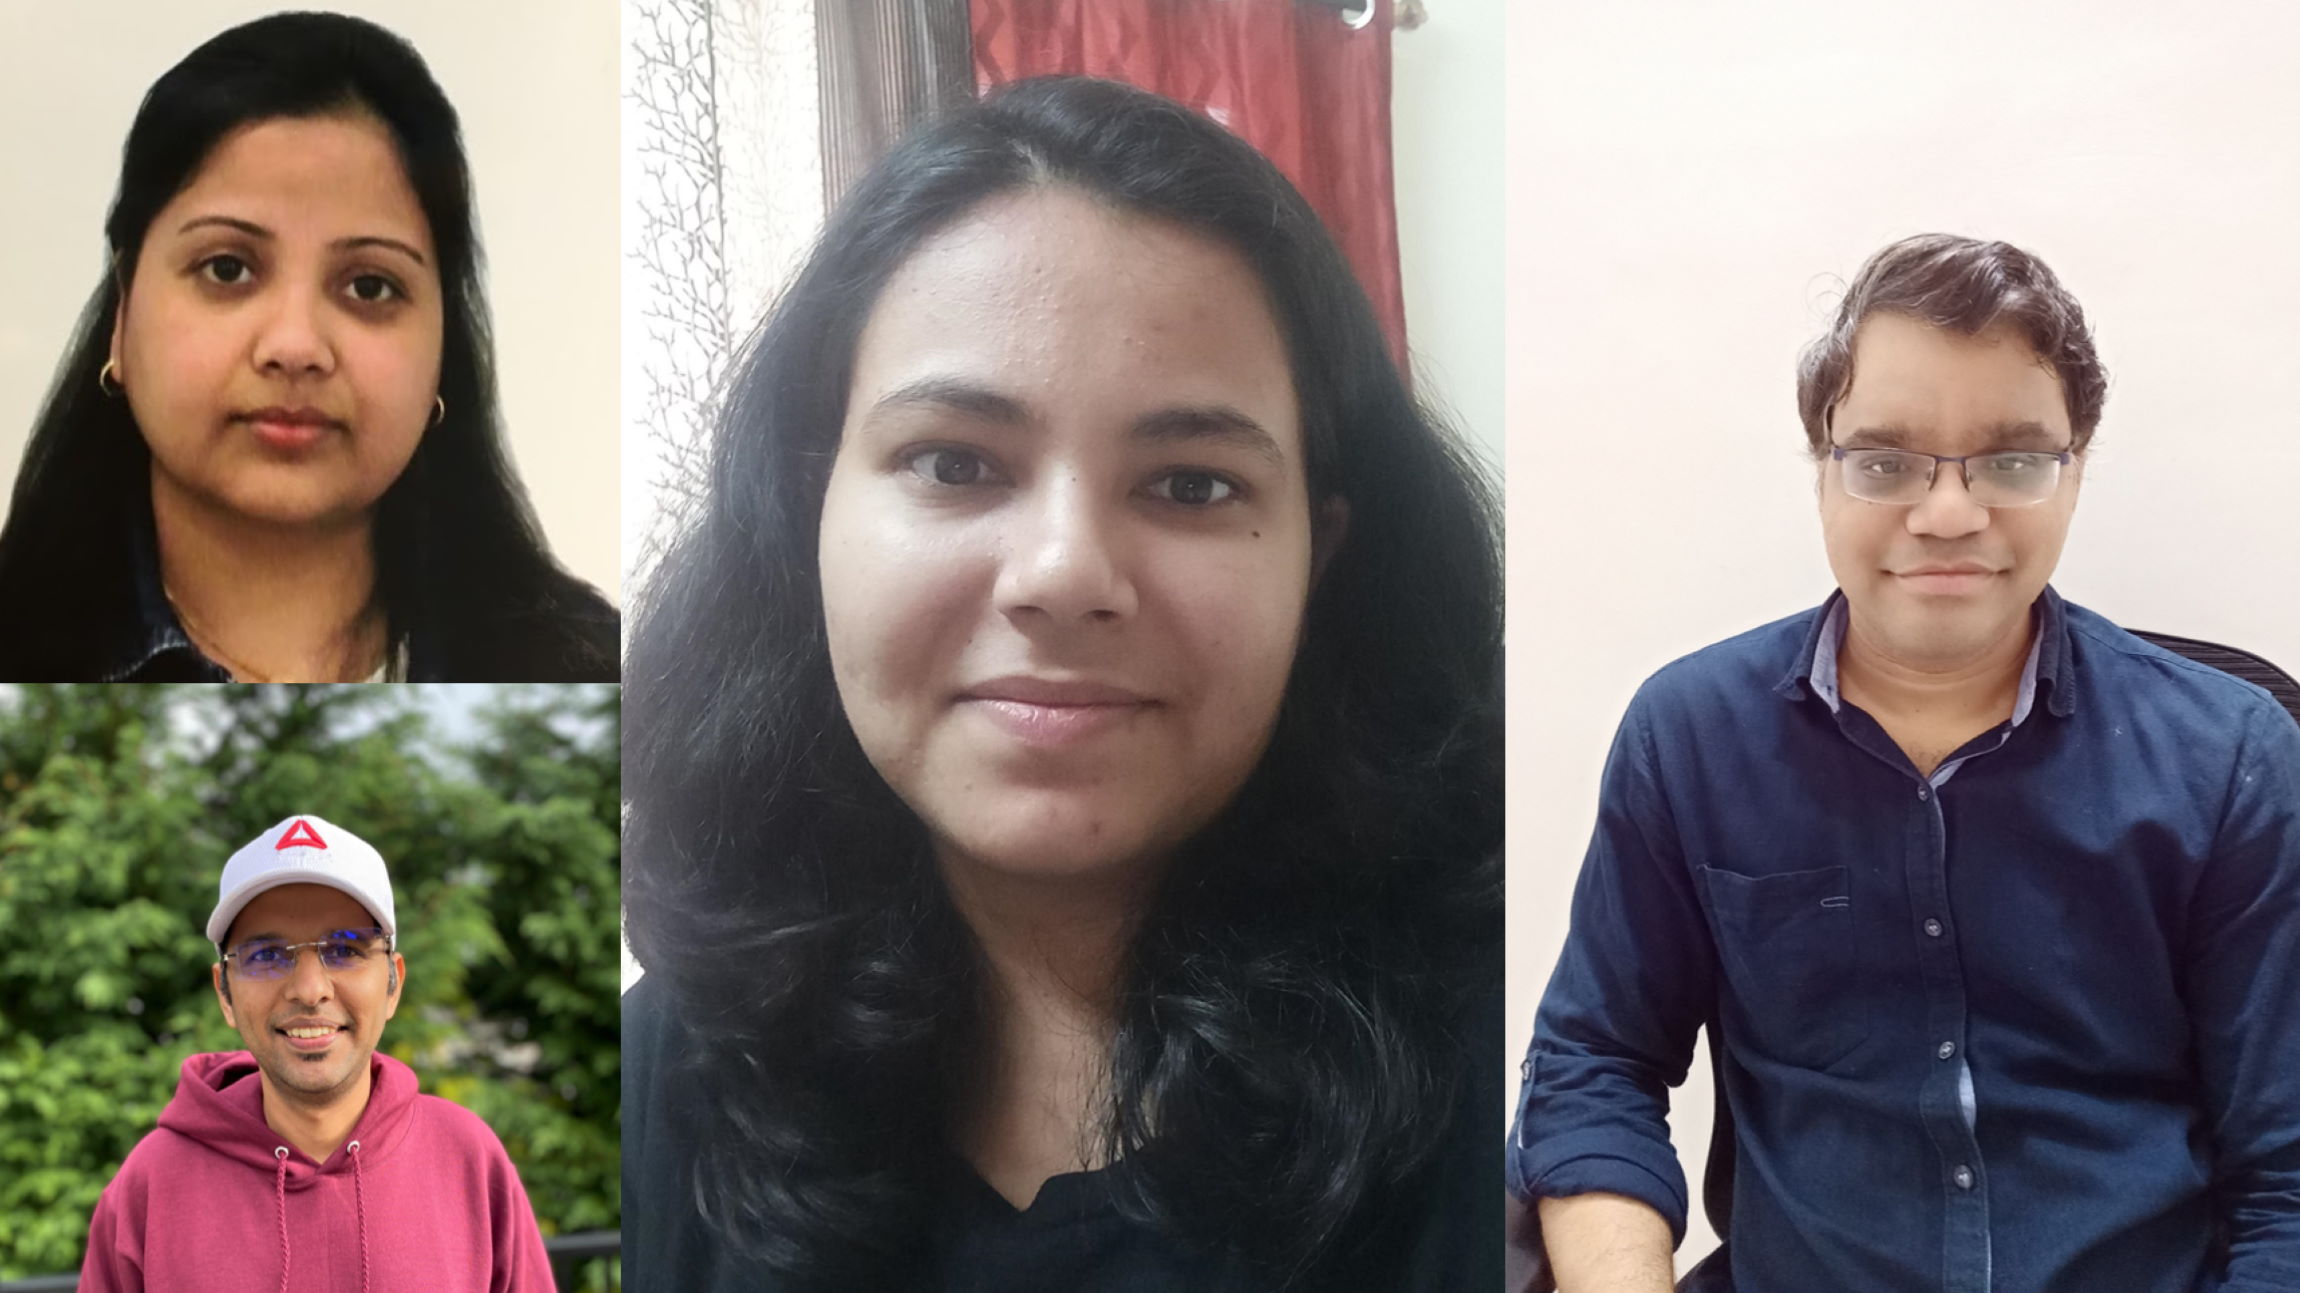 Agarwal, Chauhan, Raghuwanshi, and Khilnani are pictured together in a collection of images taken from their home office via Microsoft Teams or taken via traditional photo.